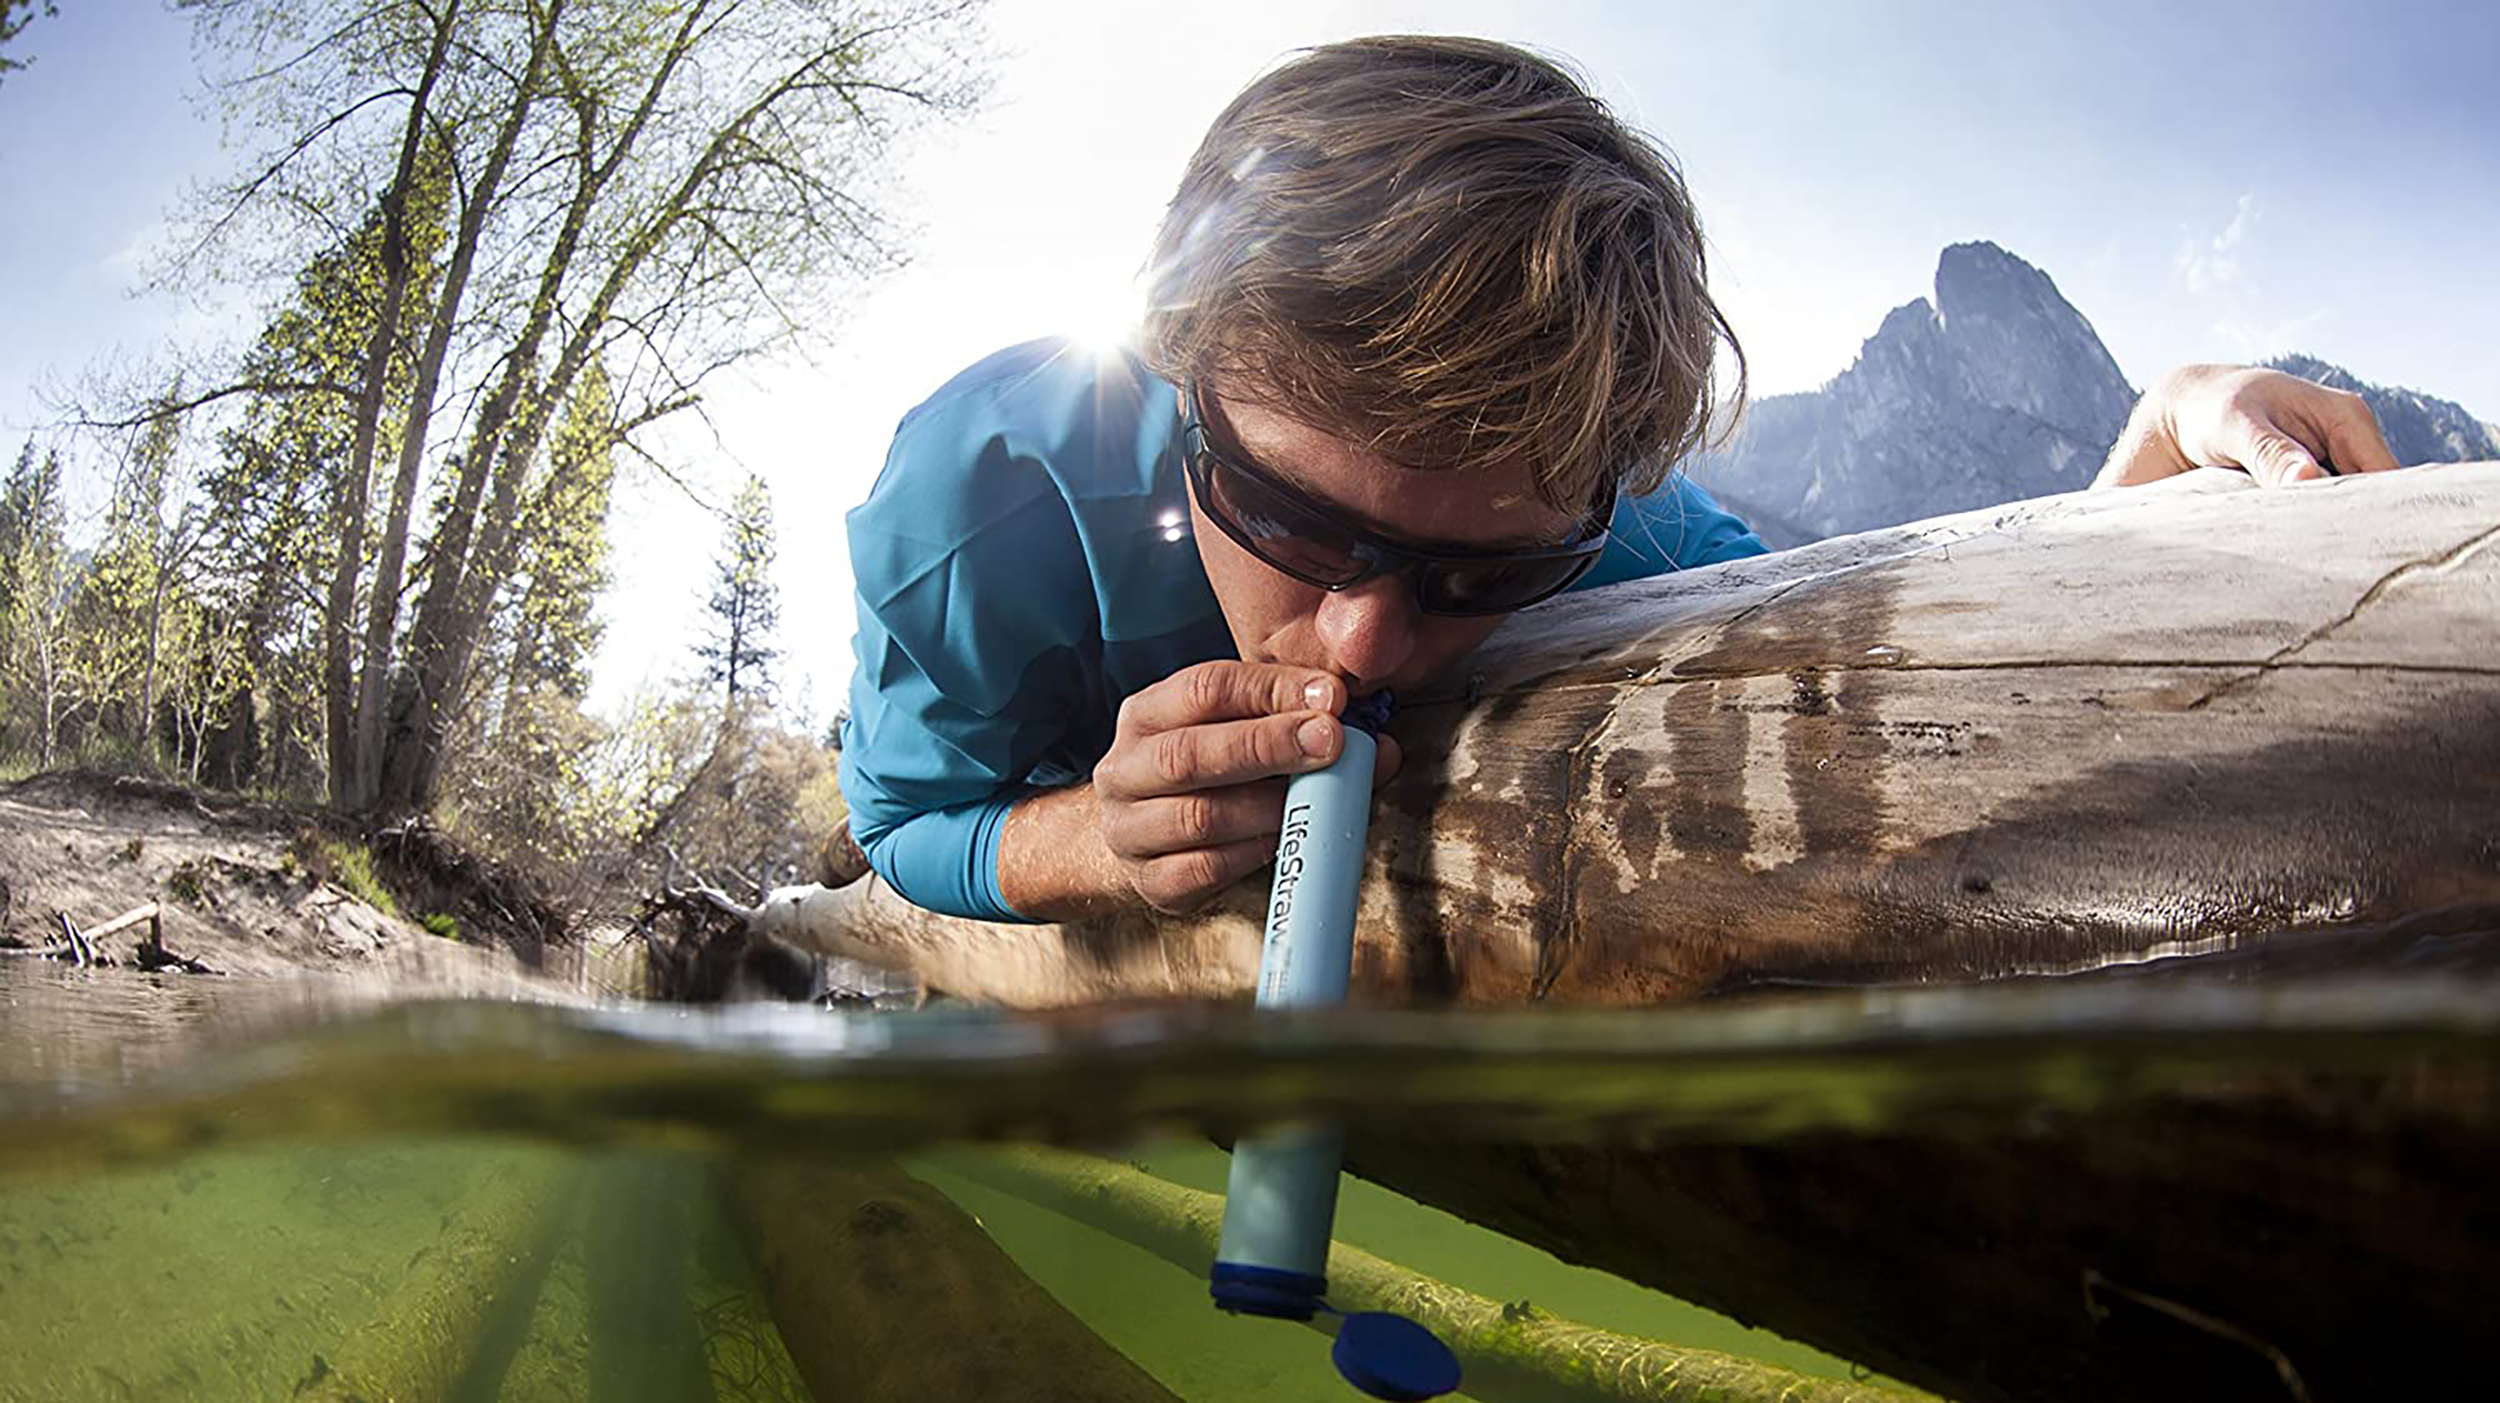 Hydrate from anywhere with LifeStraw’s personal water filter, now on sale at Amazon | CNN Underscored